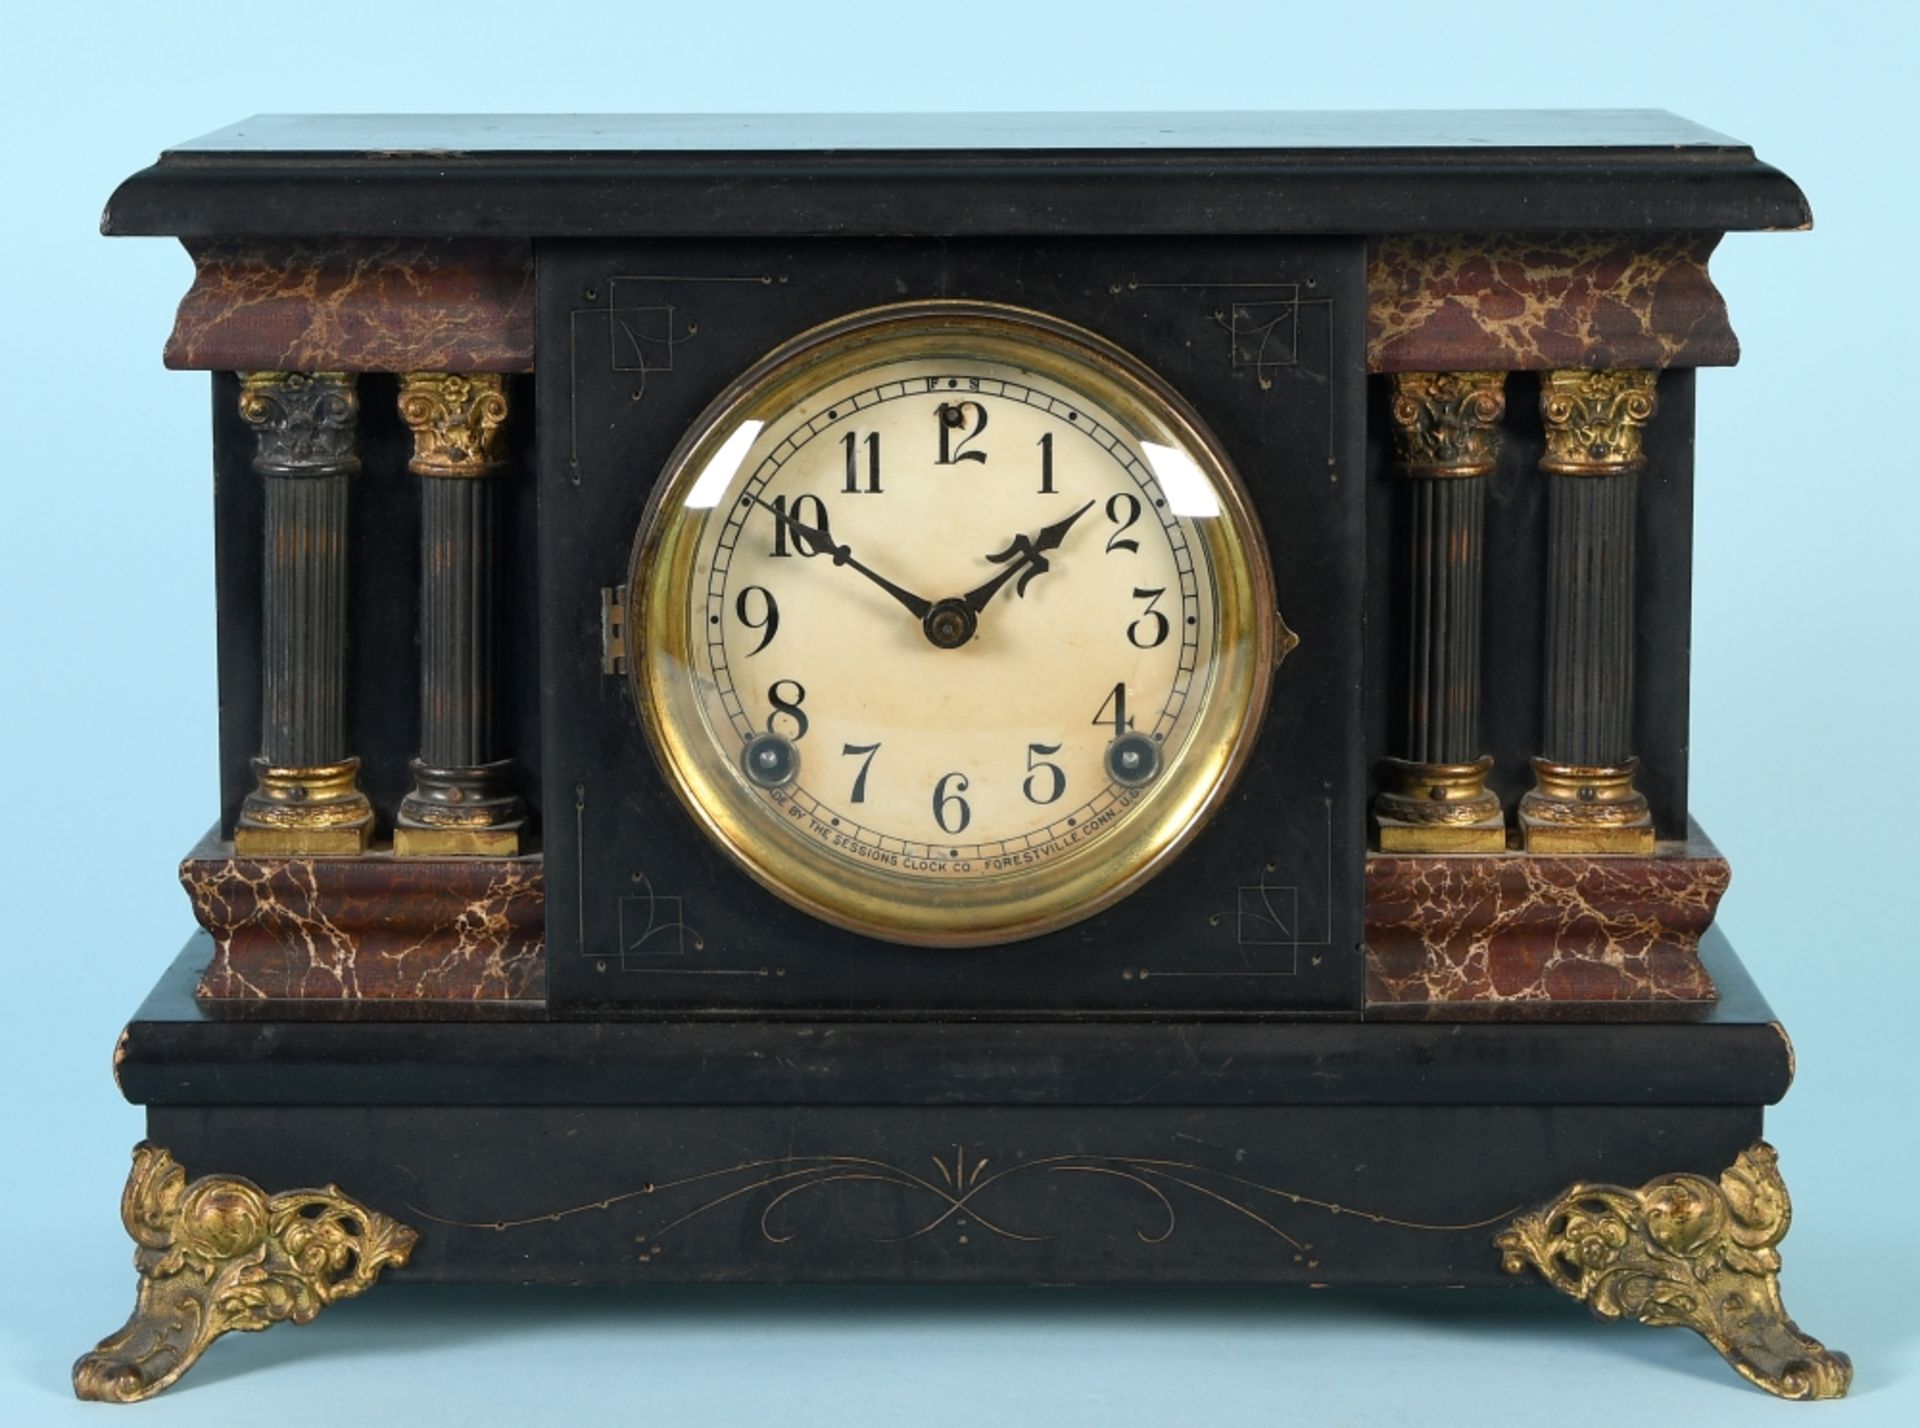 Tischuhr "The Sessions Clock Co., USA"